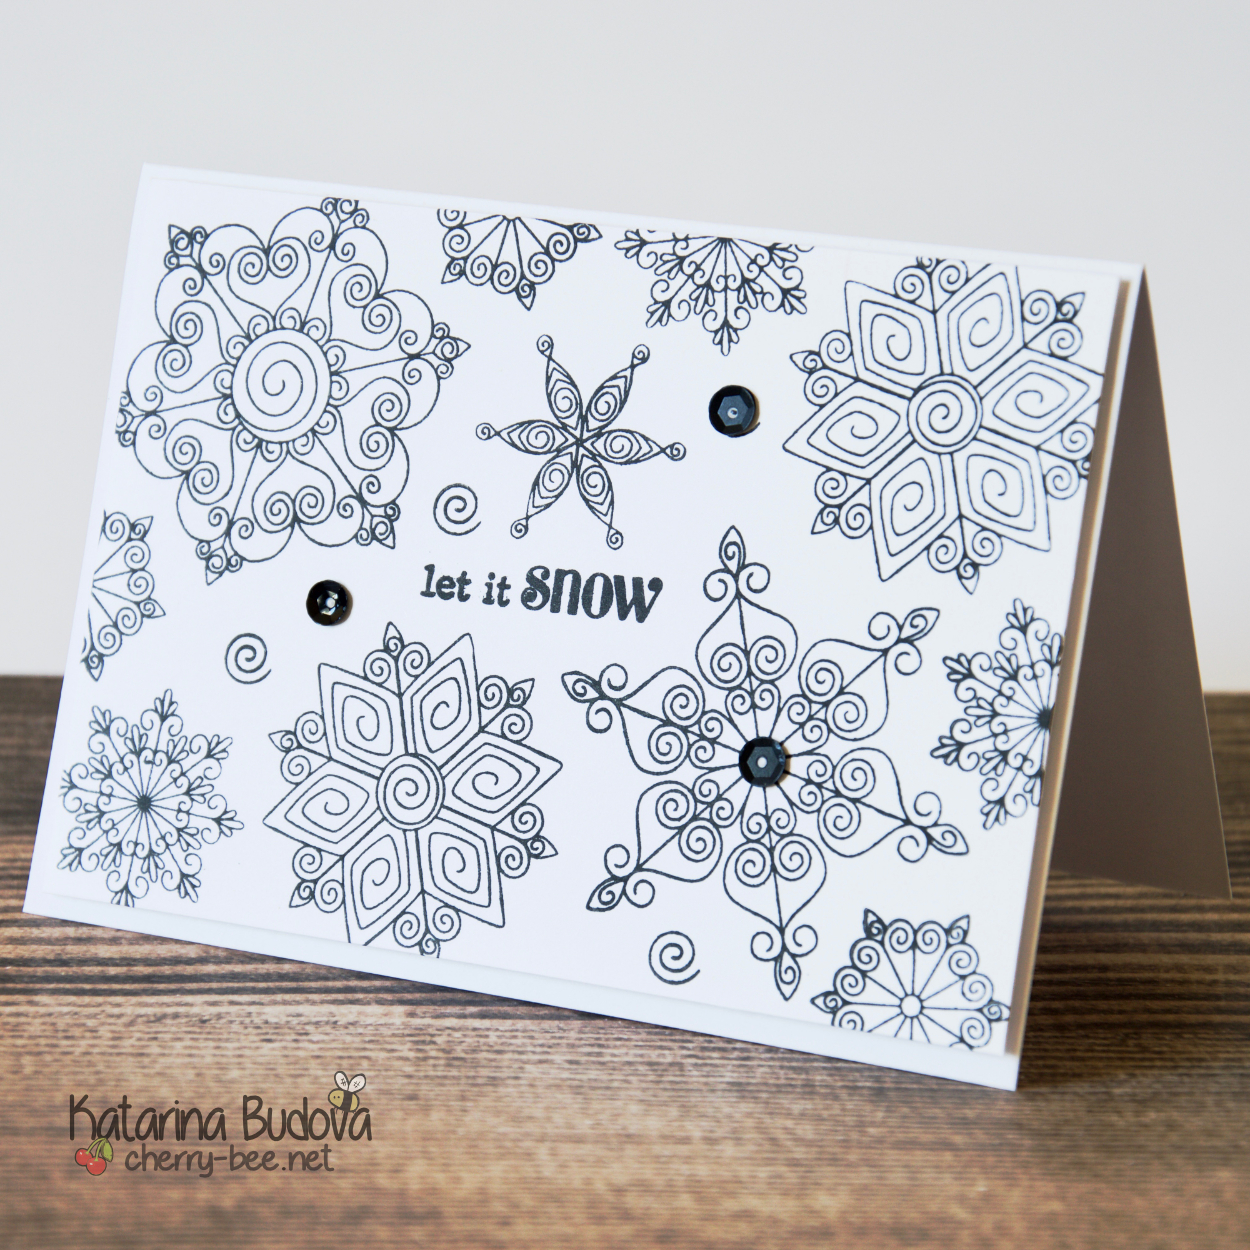 Quick and easy card for Christmas with simple snowflake background stamping. Technique that is simple to recreate even in bulk for any occasion, all you need is the right stamp set and ink.